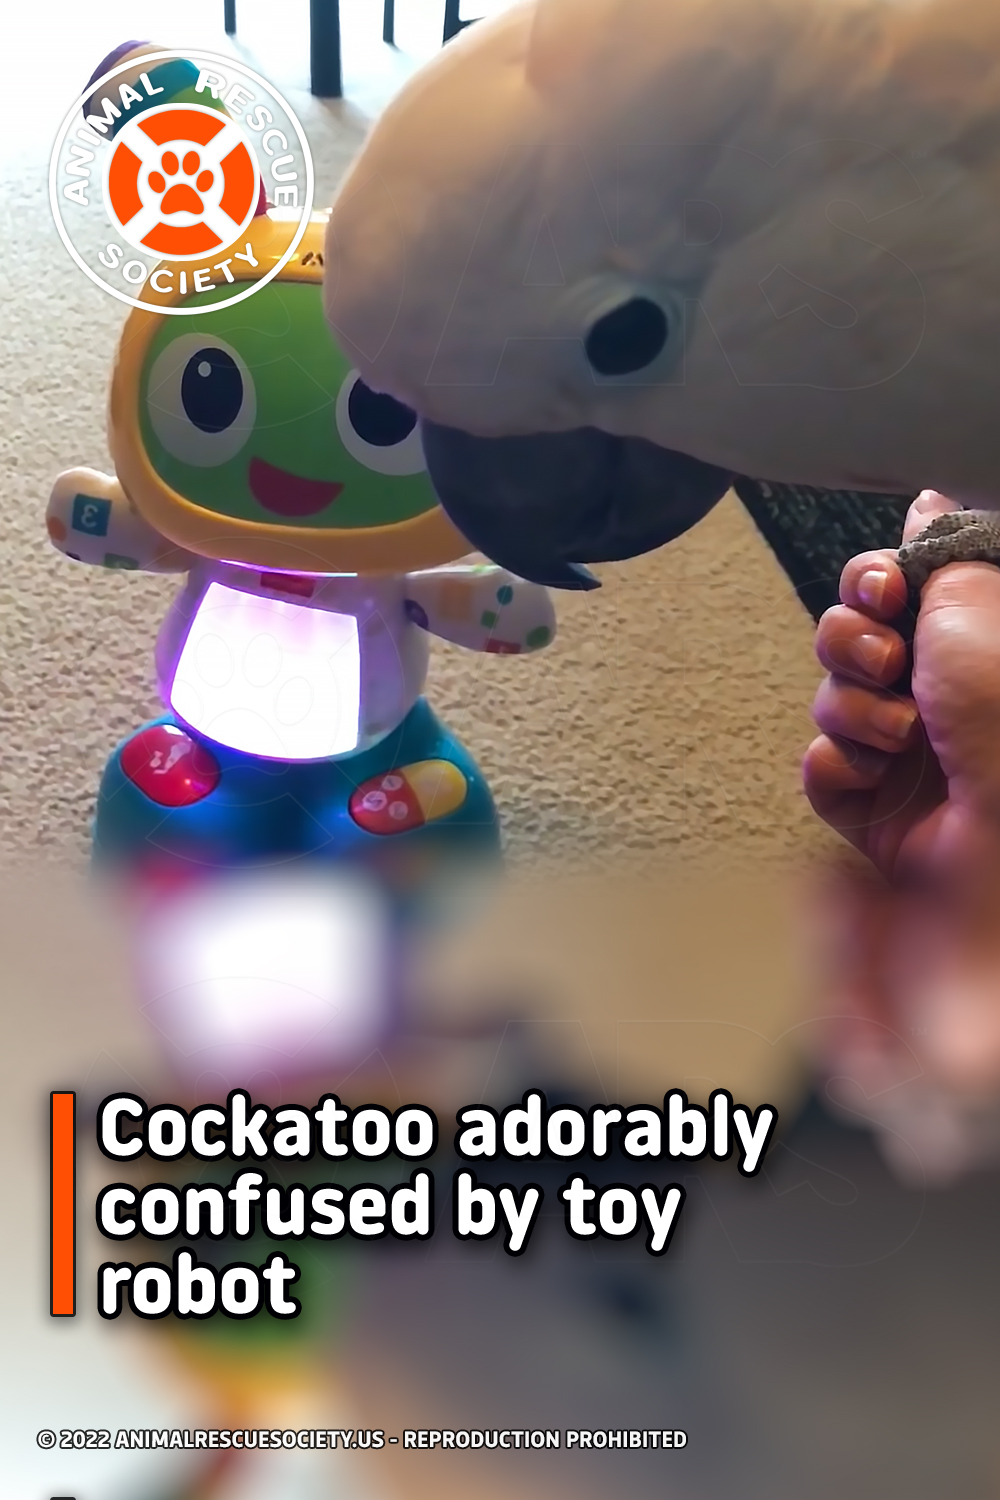 Cockatoo adorably confused by toy robot